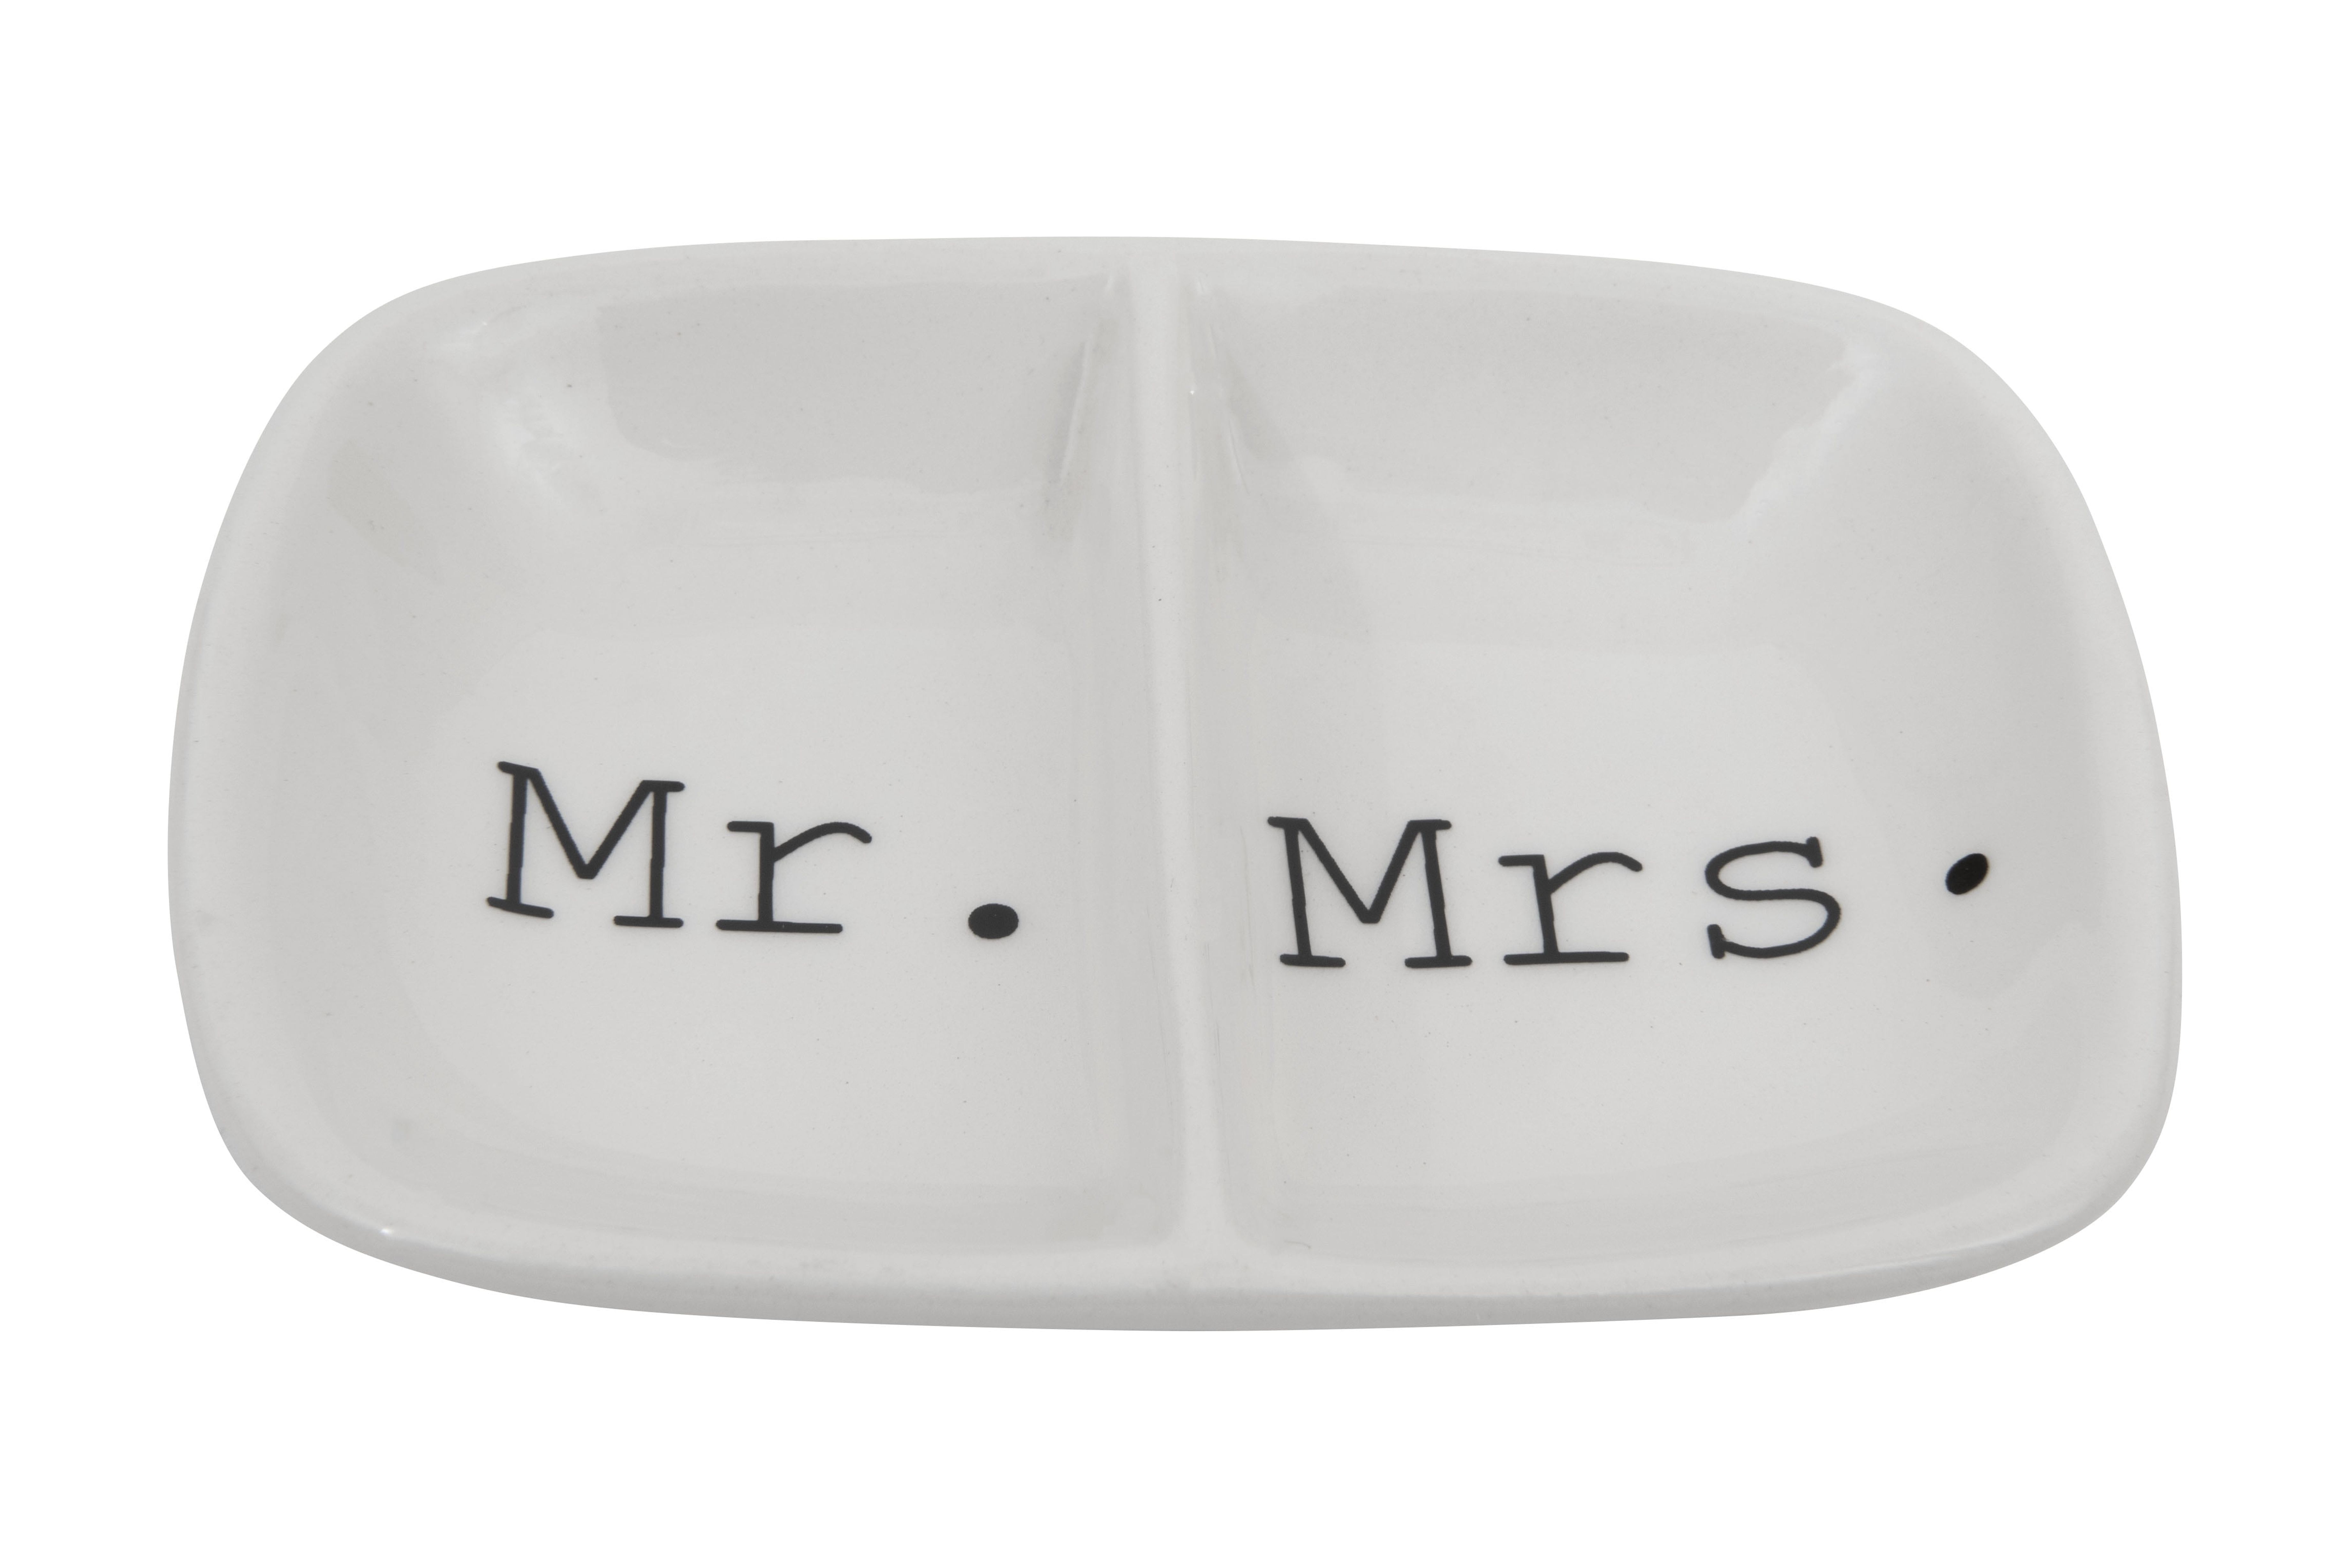 Creative Co-Op Ceramic Mr. & Mrs. Divided Ring Dish - image 1 of 7